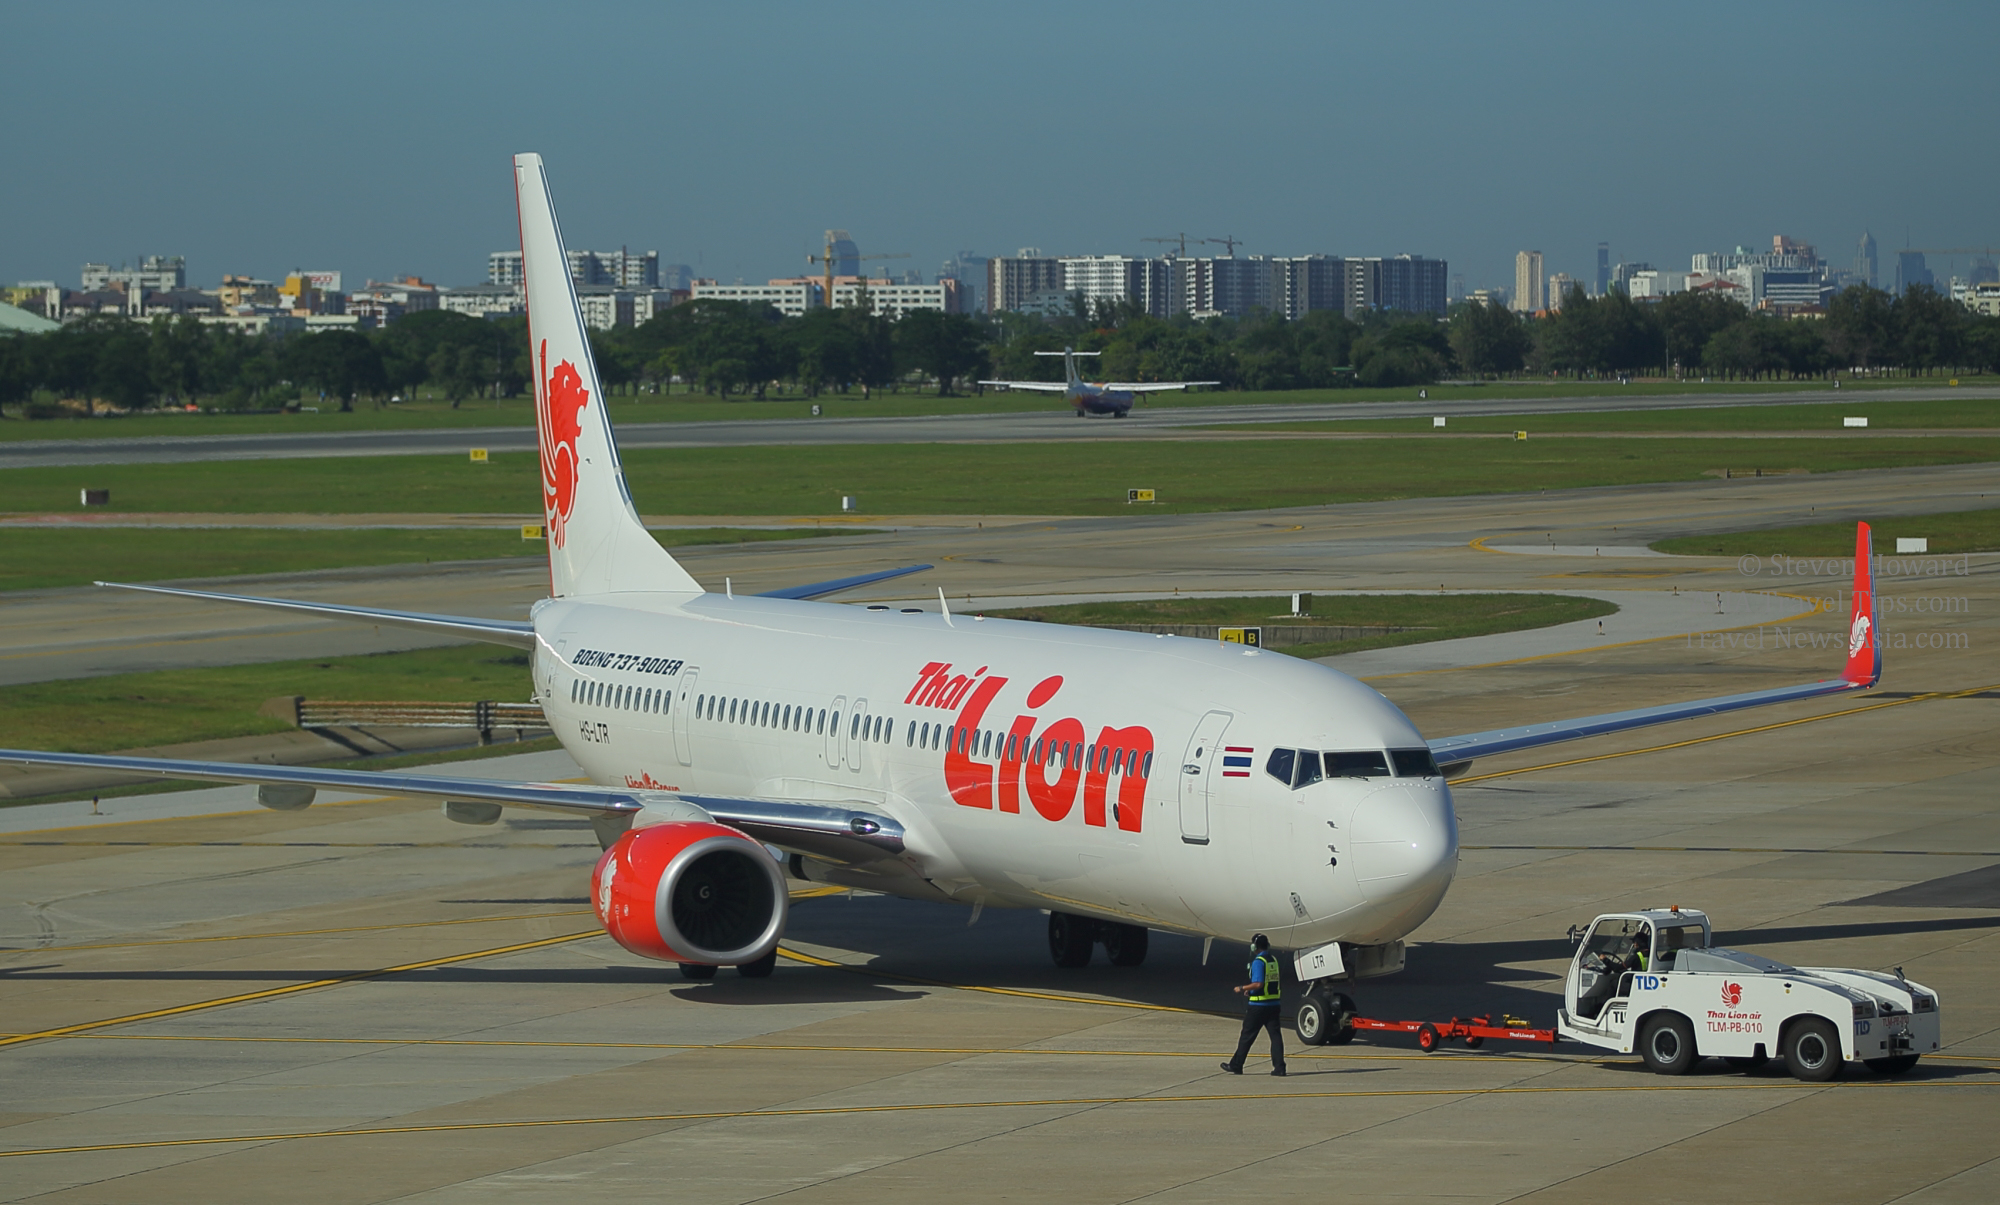 Thai Lion Air Boeing 737-900ER reg: HS-LTR at Don Mueang Airport in Bangkok, Thailand. Click to enlarge.